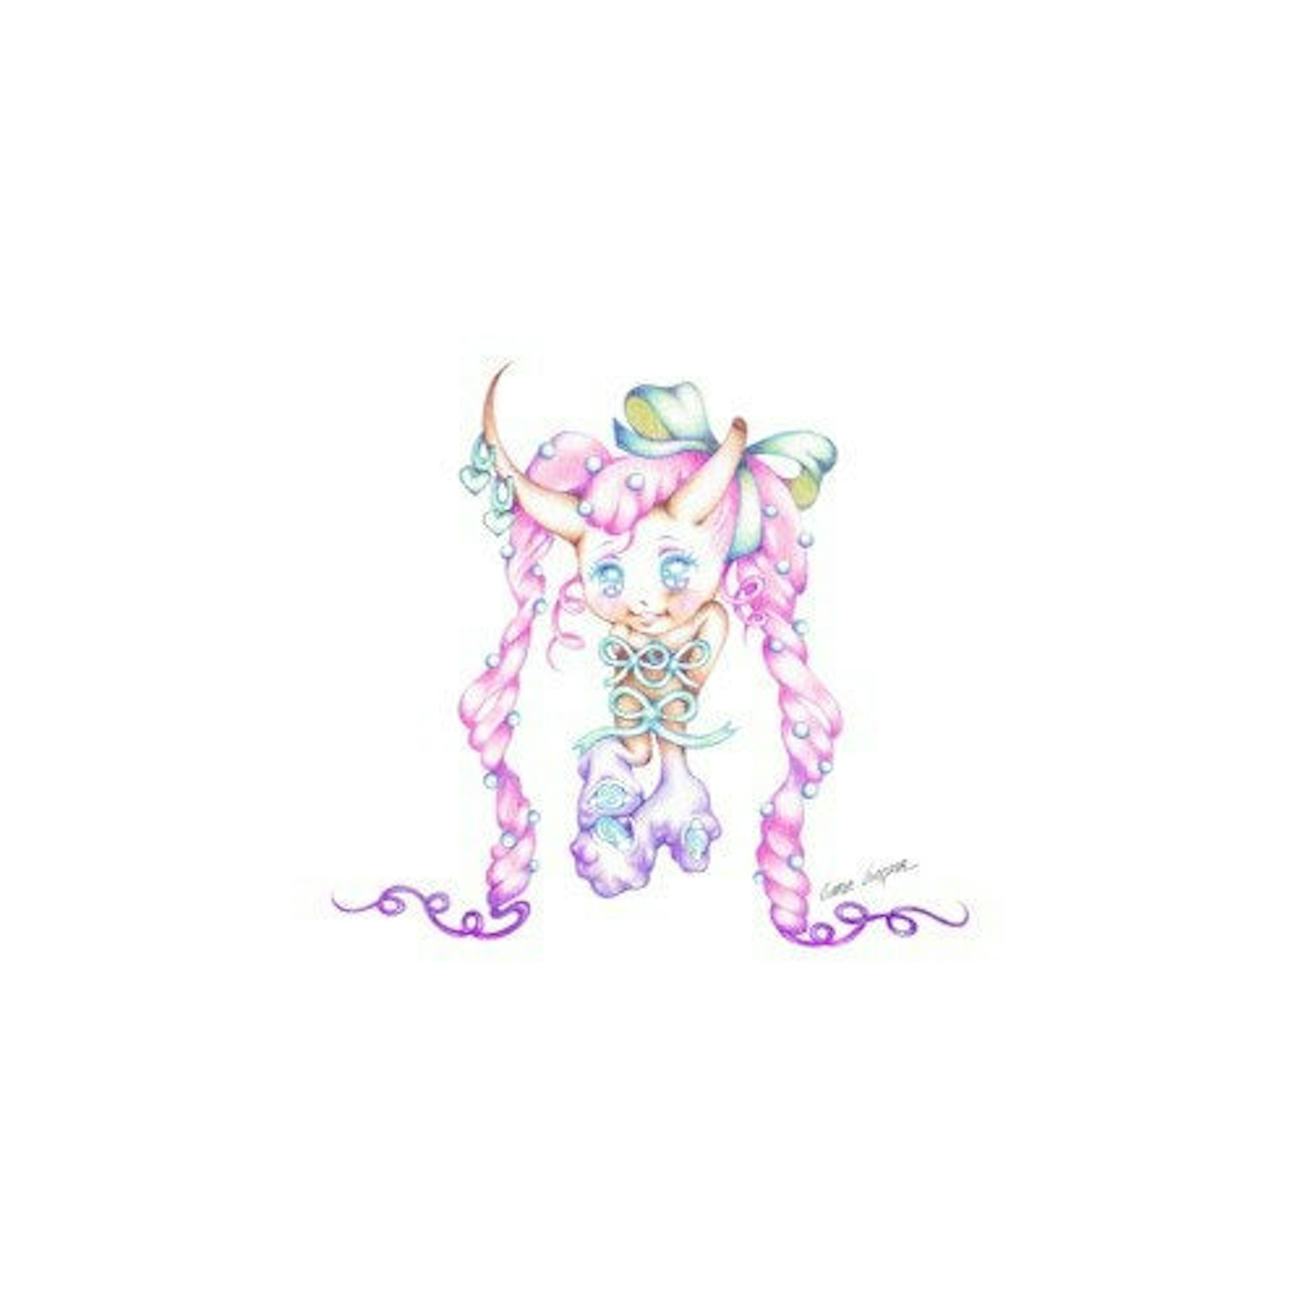 Small creature with devil horns, long pink hair and blue bows all over it's body.